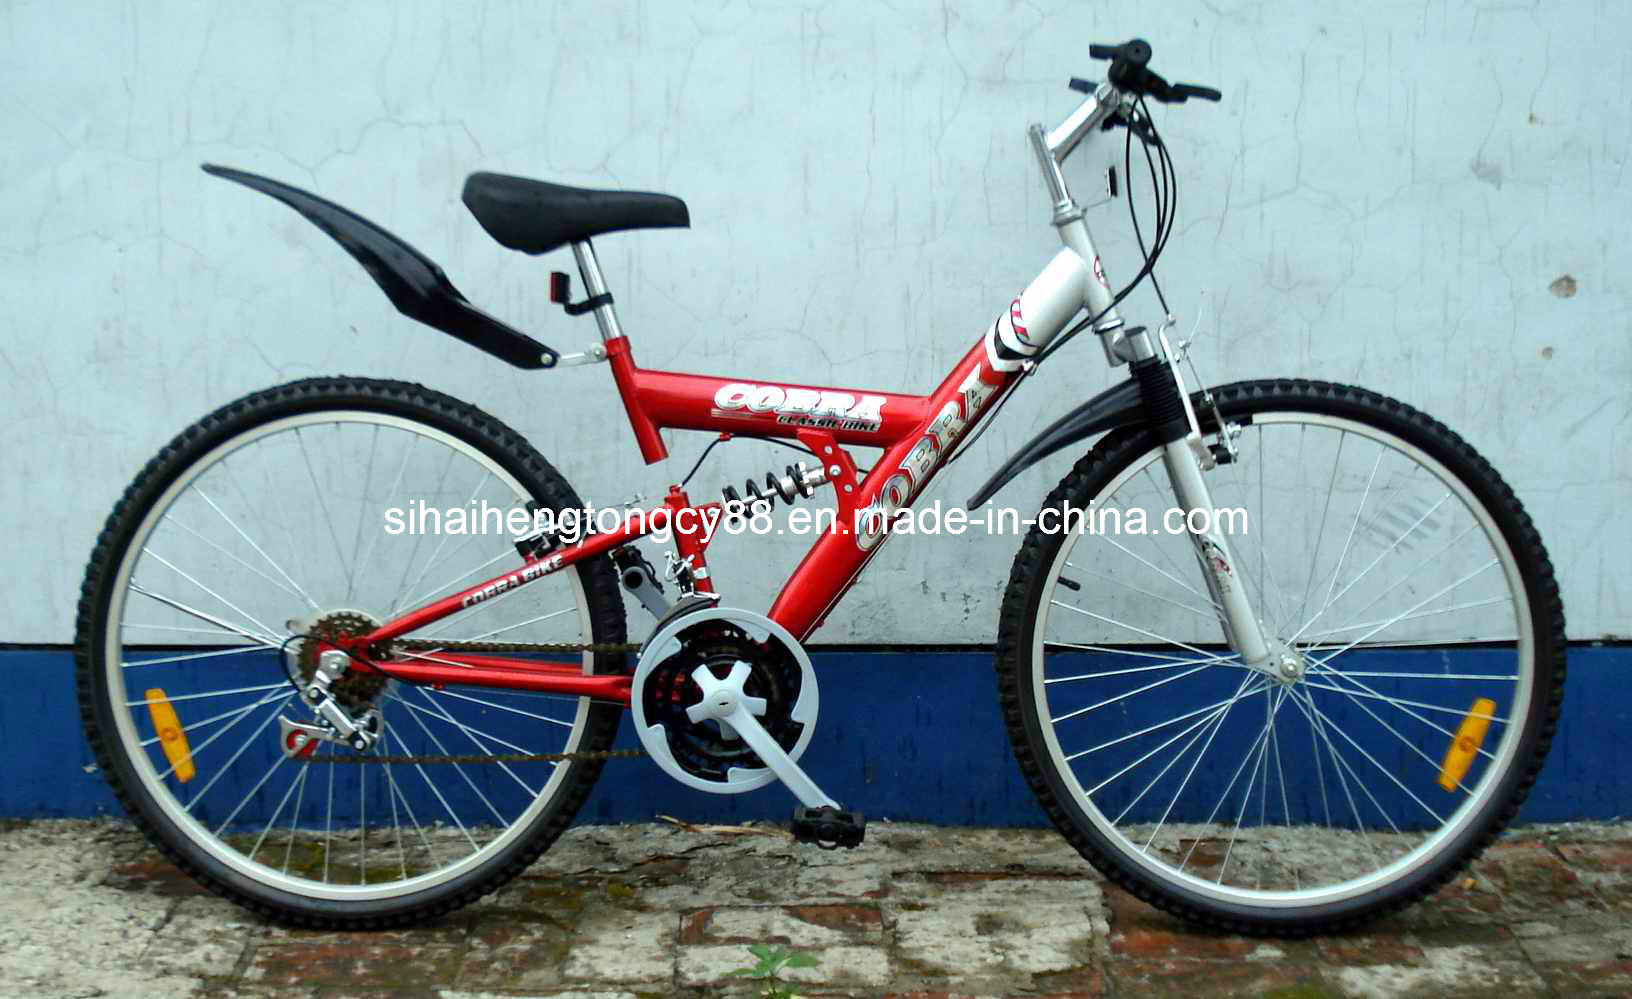 Popular Simple Suspension Bicycle for Sale (SH-SMTB059)